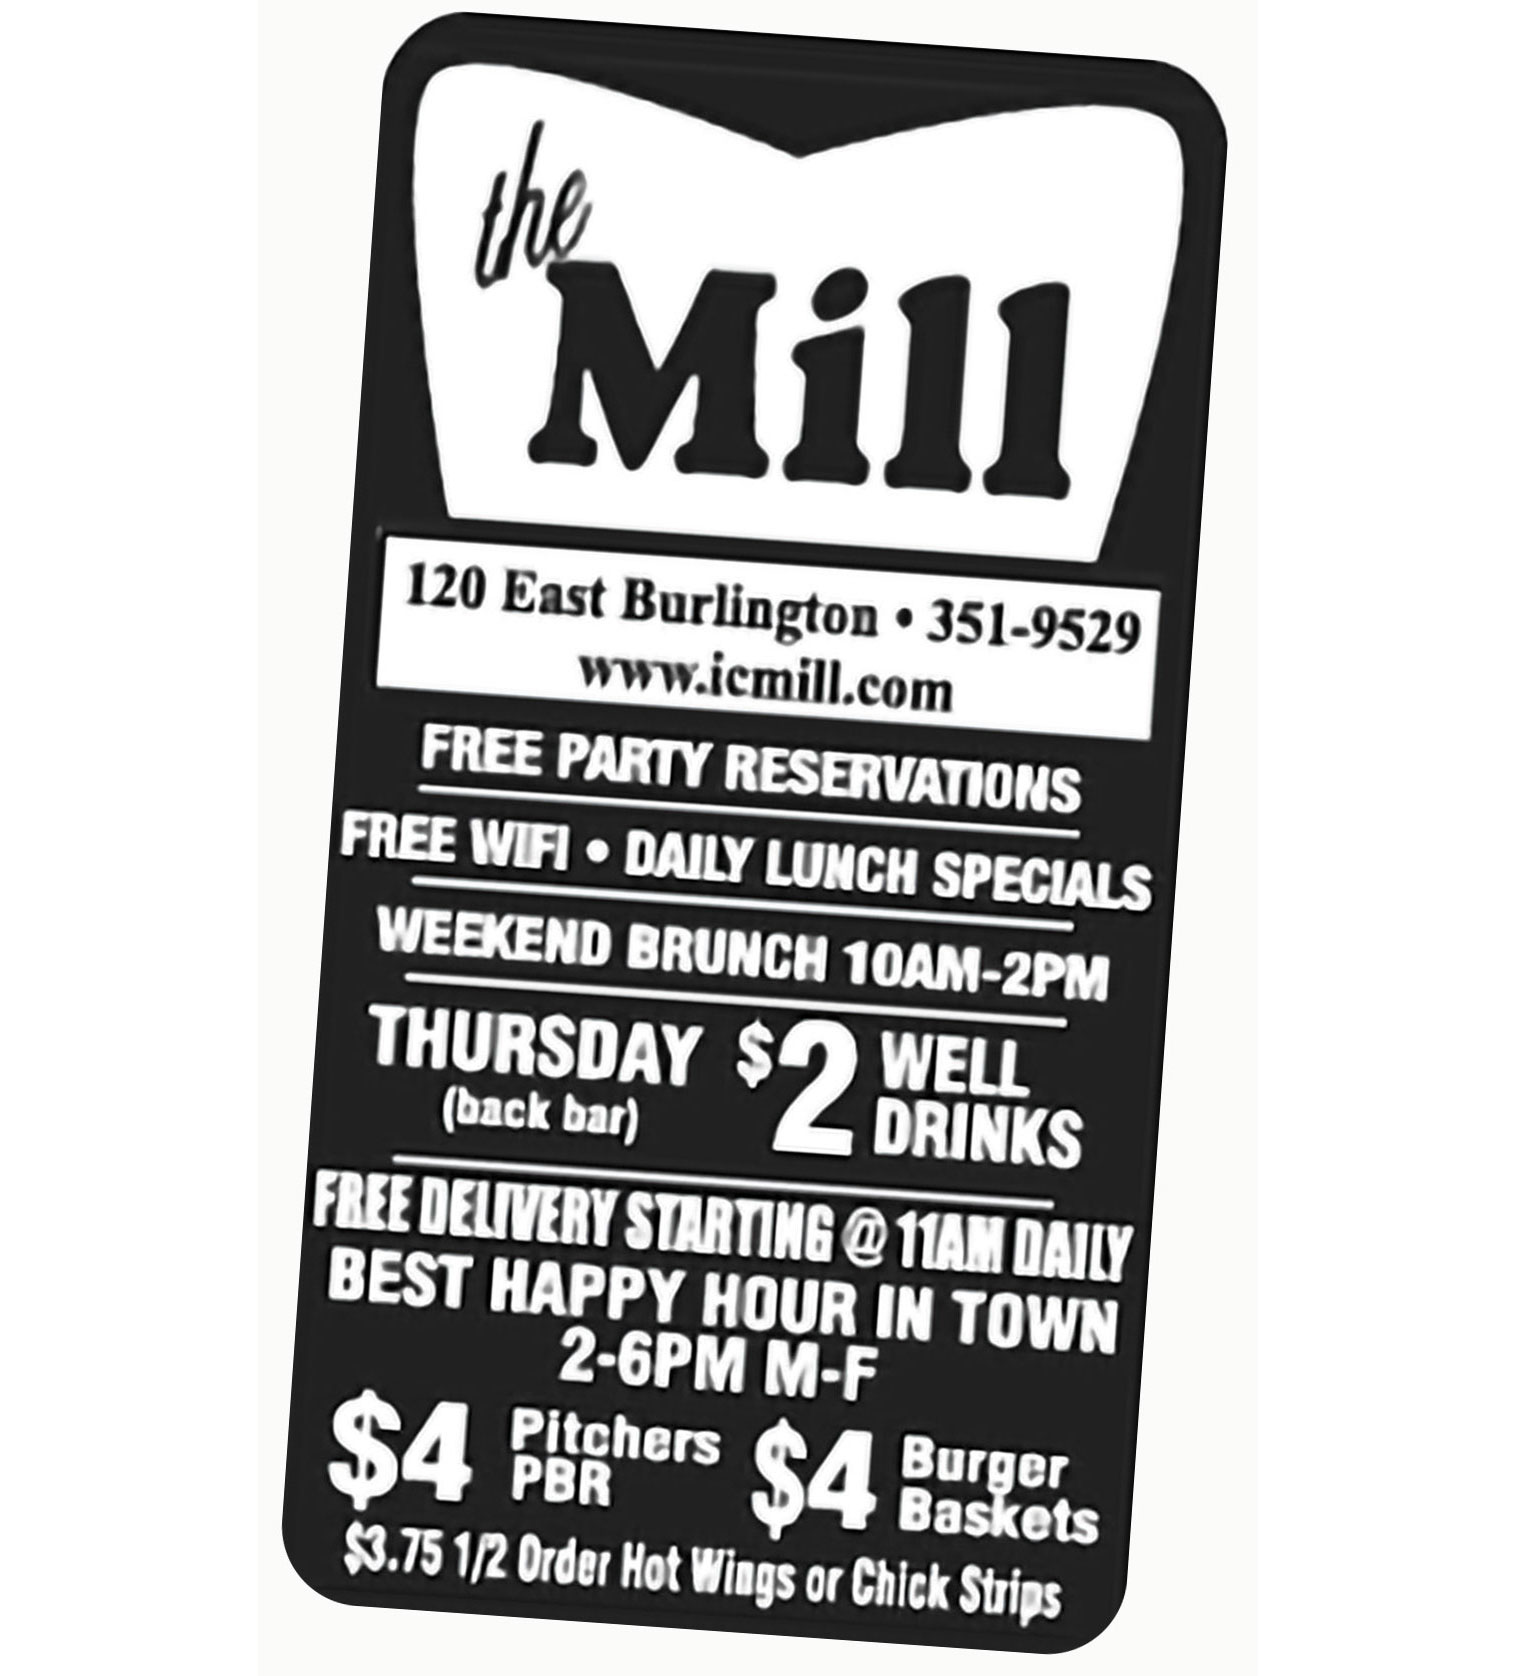 The Mill advertisement